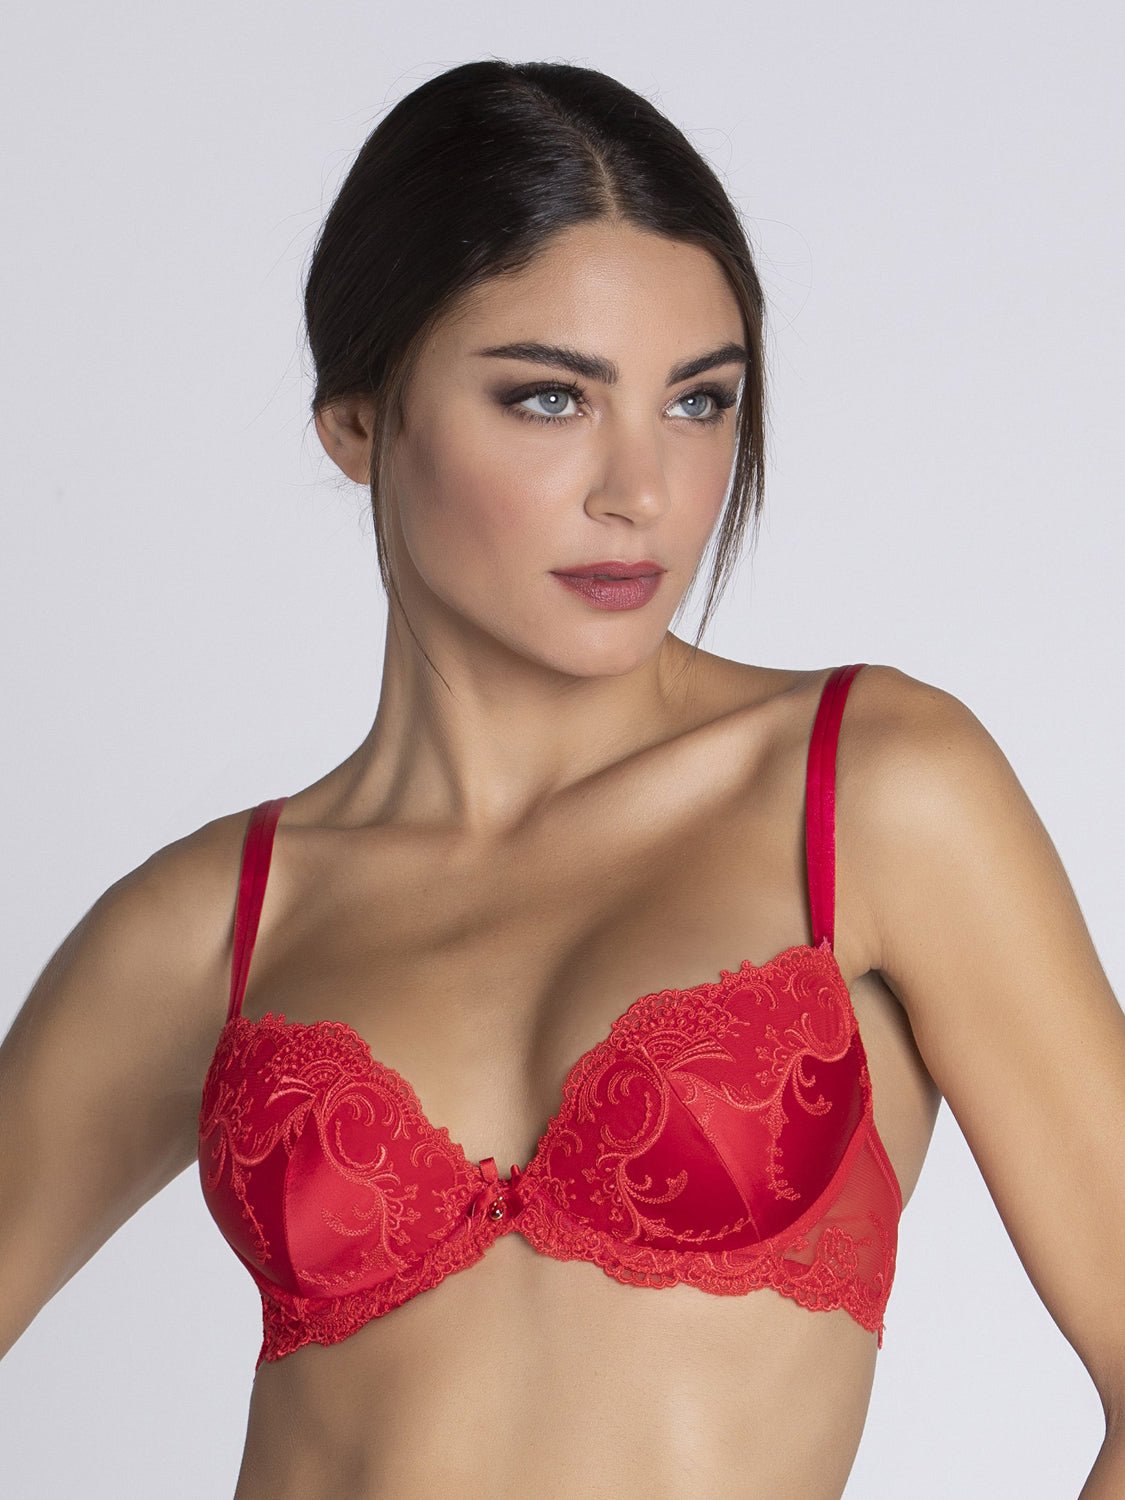 red push up bra by Lise Charmel - Dressing floral line